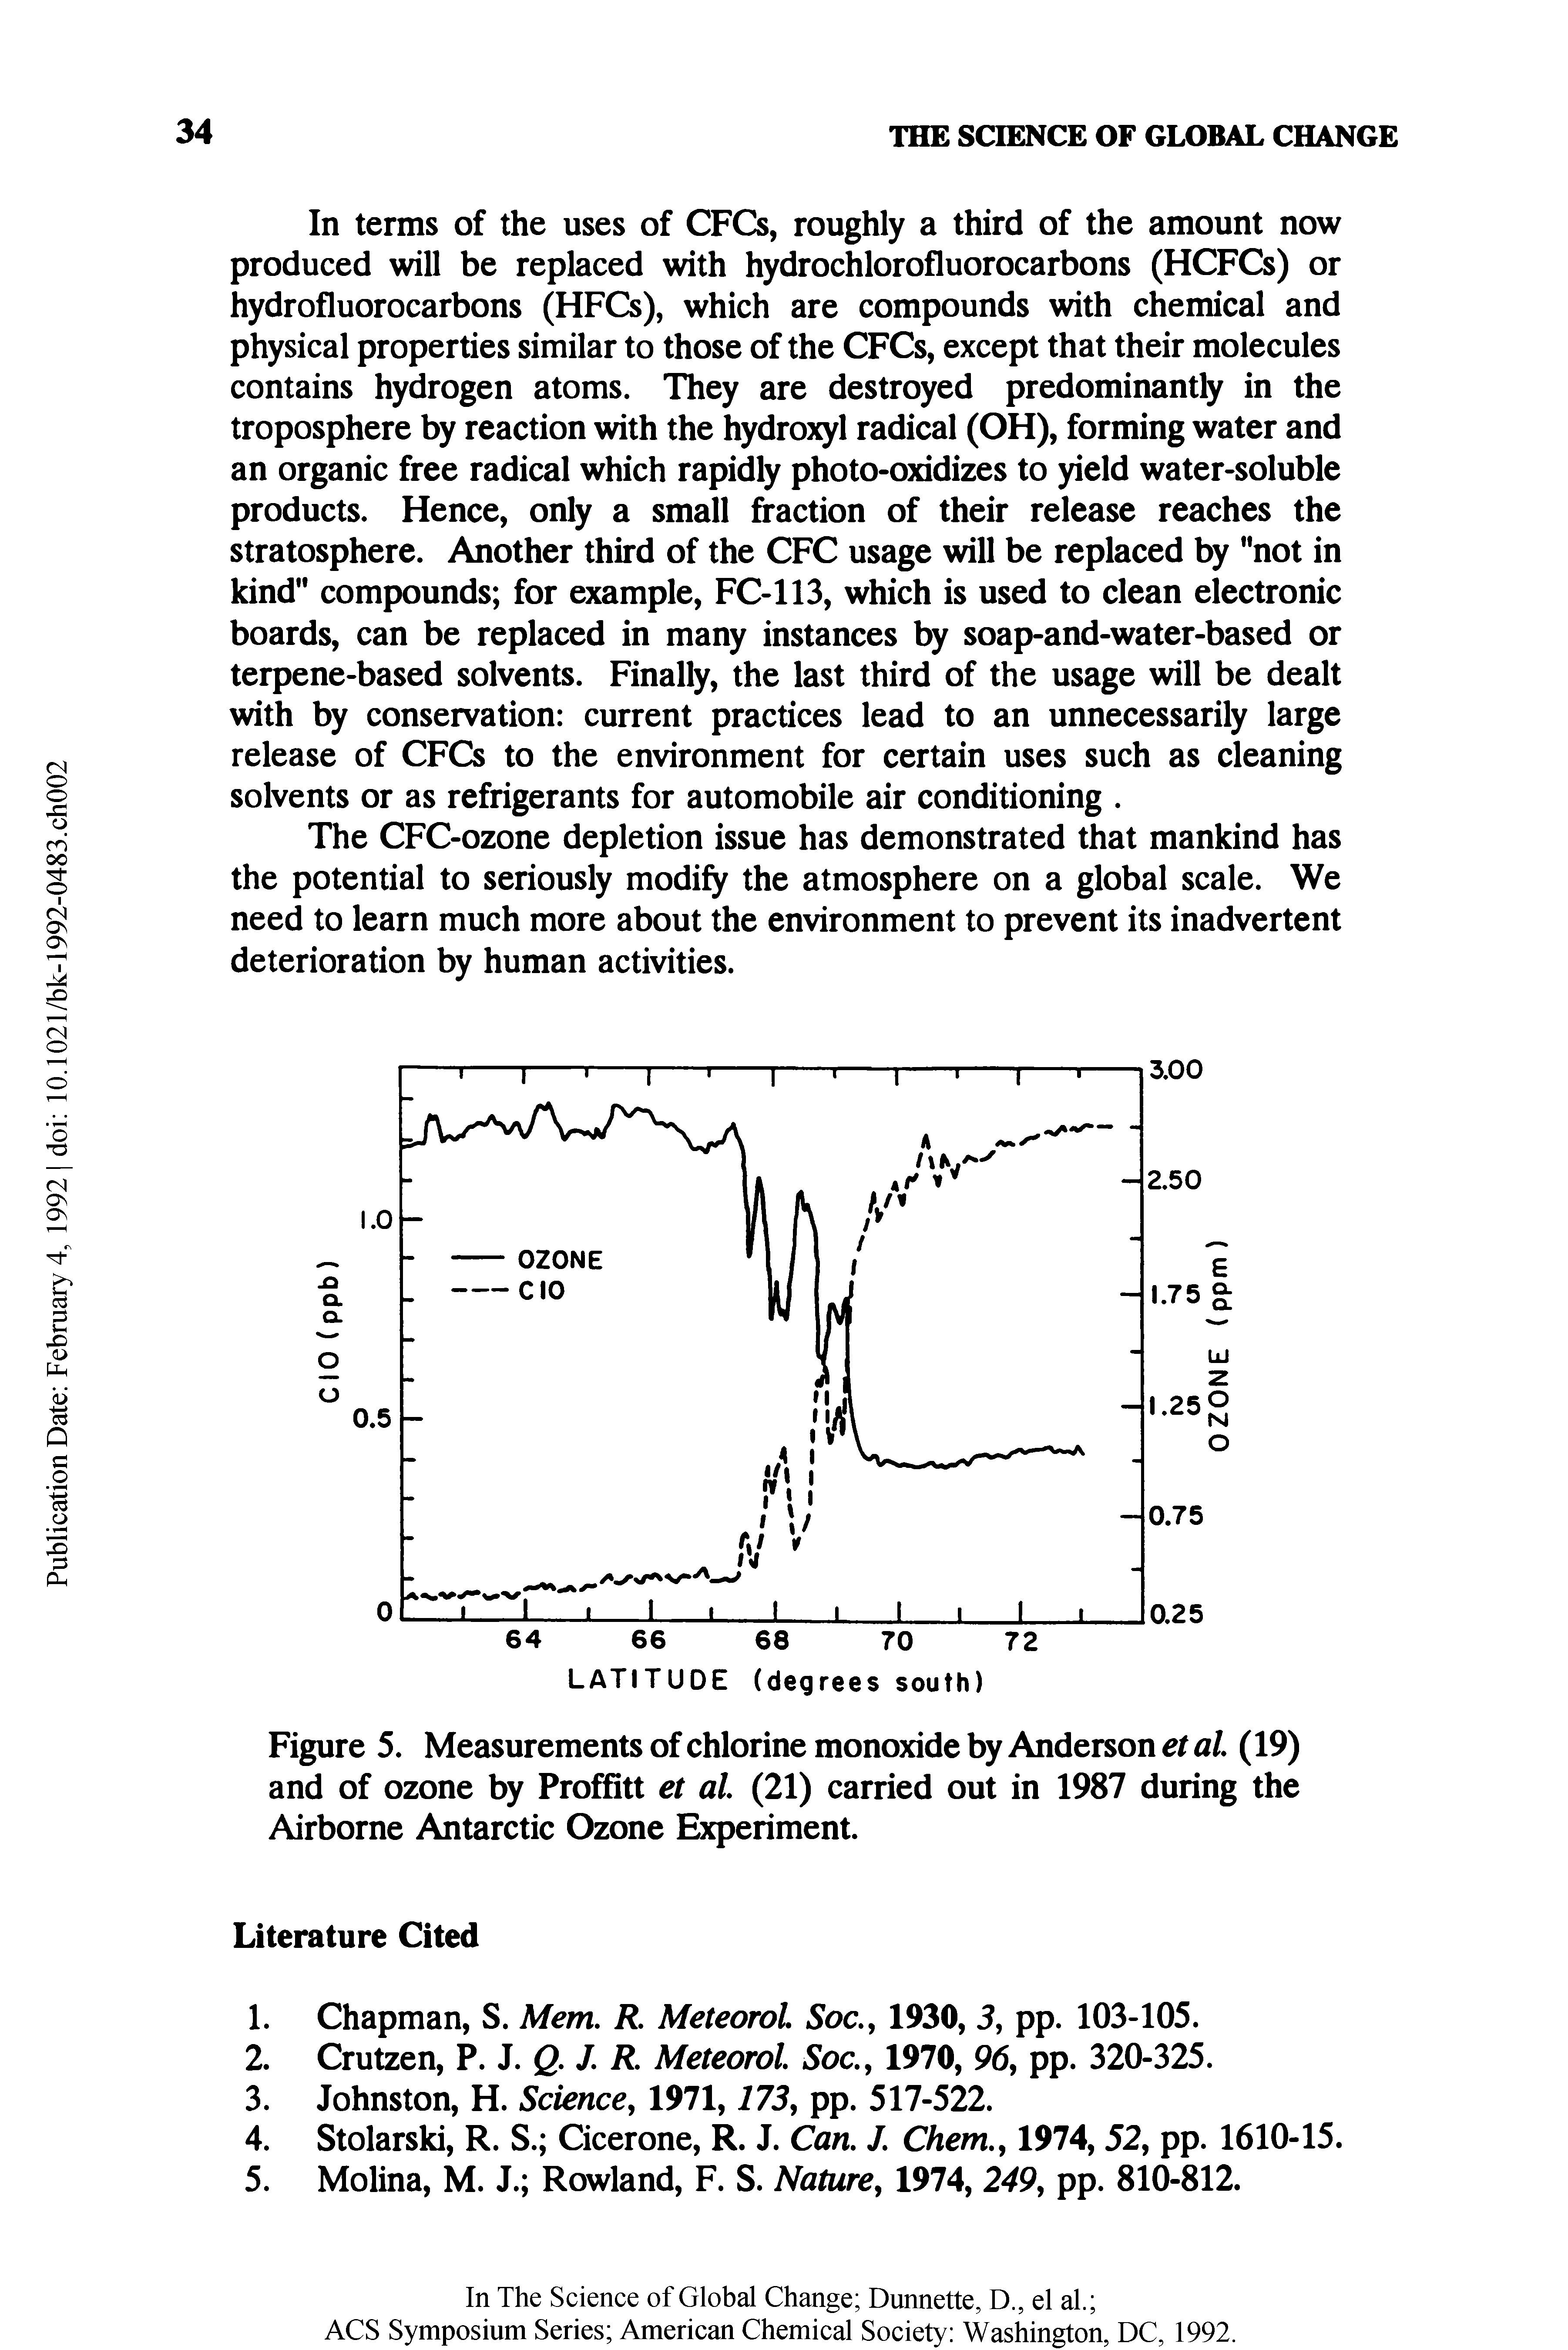 Figure 5. Measurements of chlorine monoxide by Anderson et al (19) and of ozone by Proffitt et al (21) carried out in 1987 during the Airborne Antarctic Ozone Experiment.